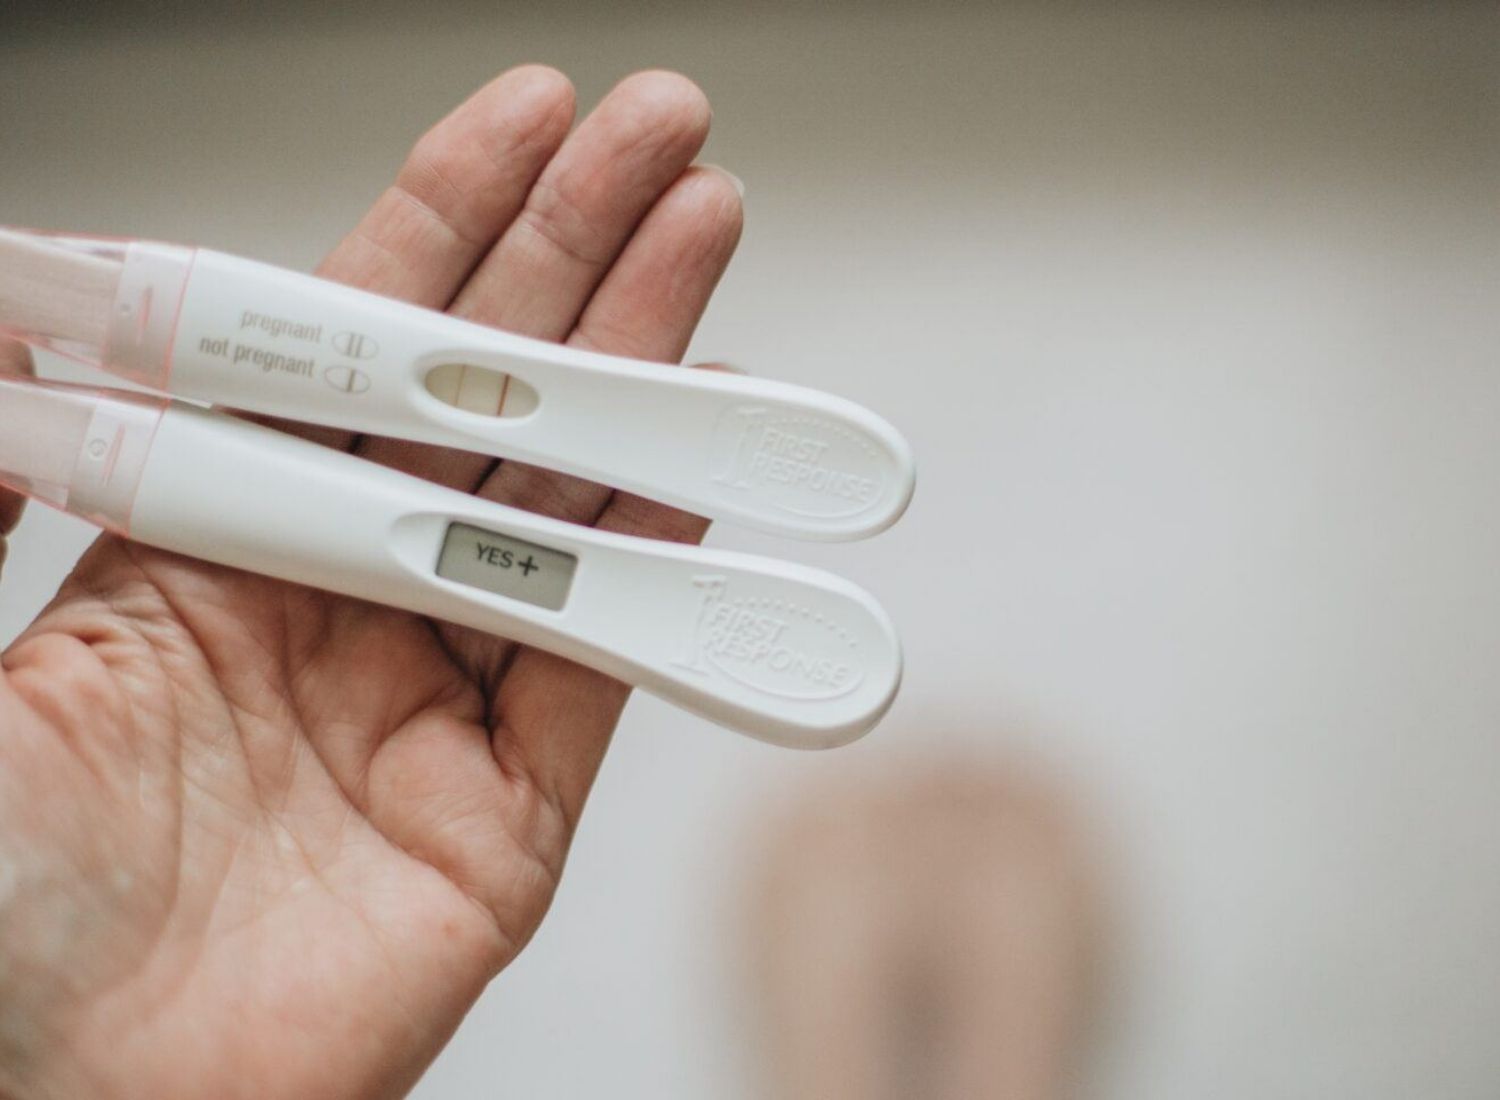 Facts You Didn't Know About Home Pregnancy Tests